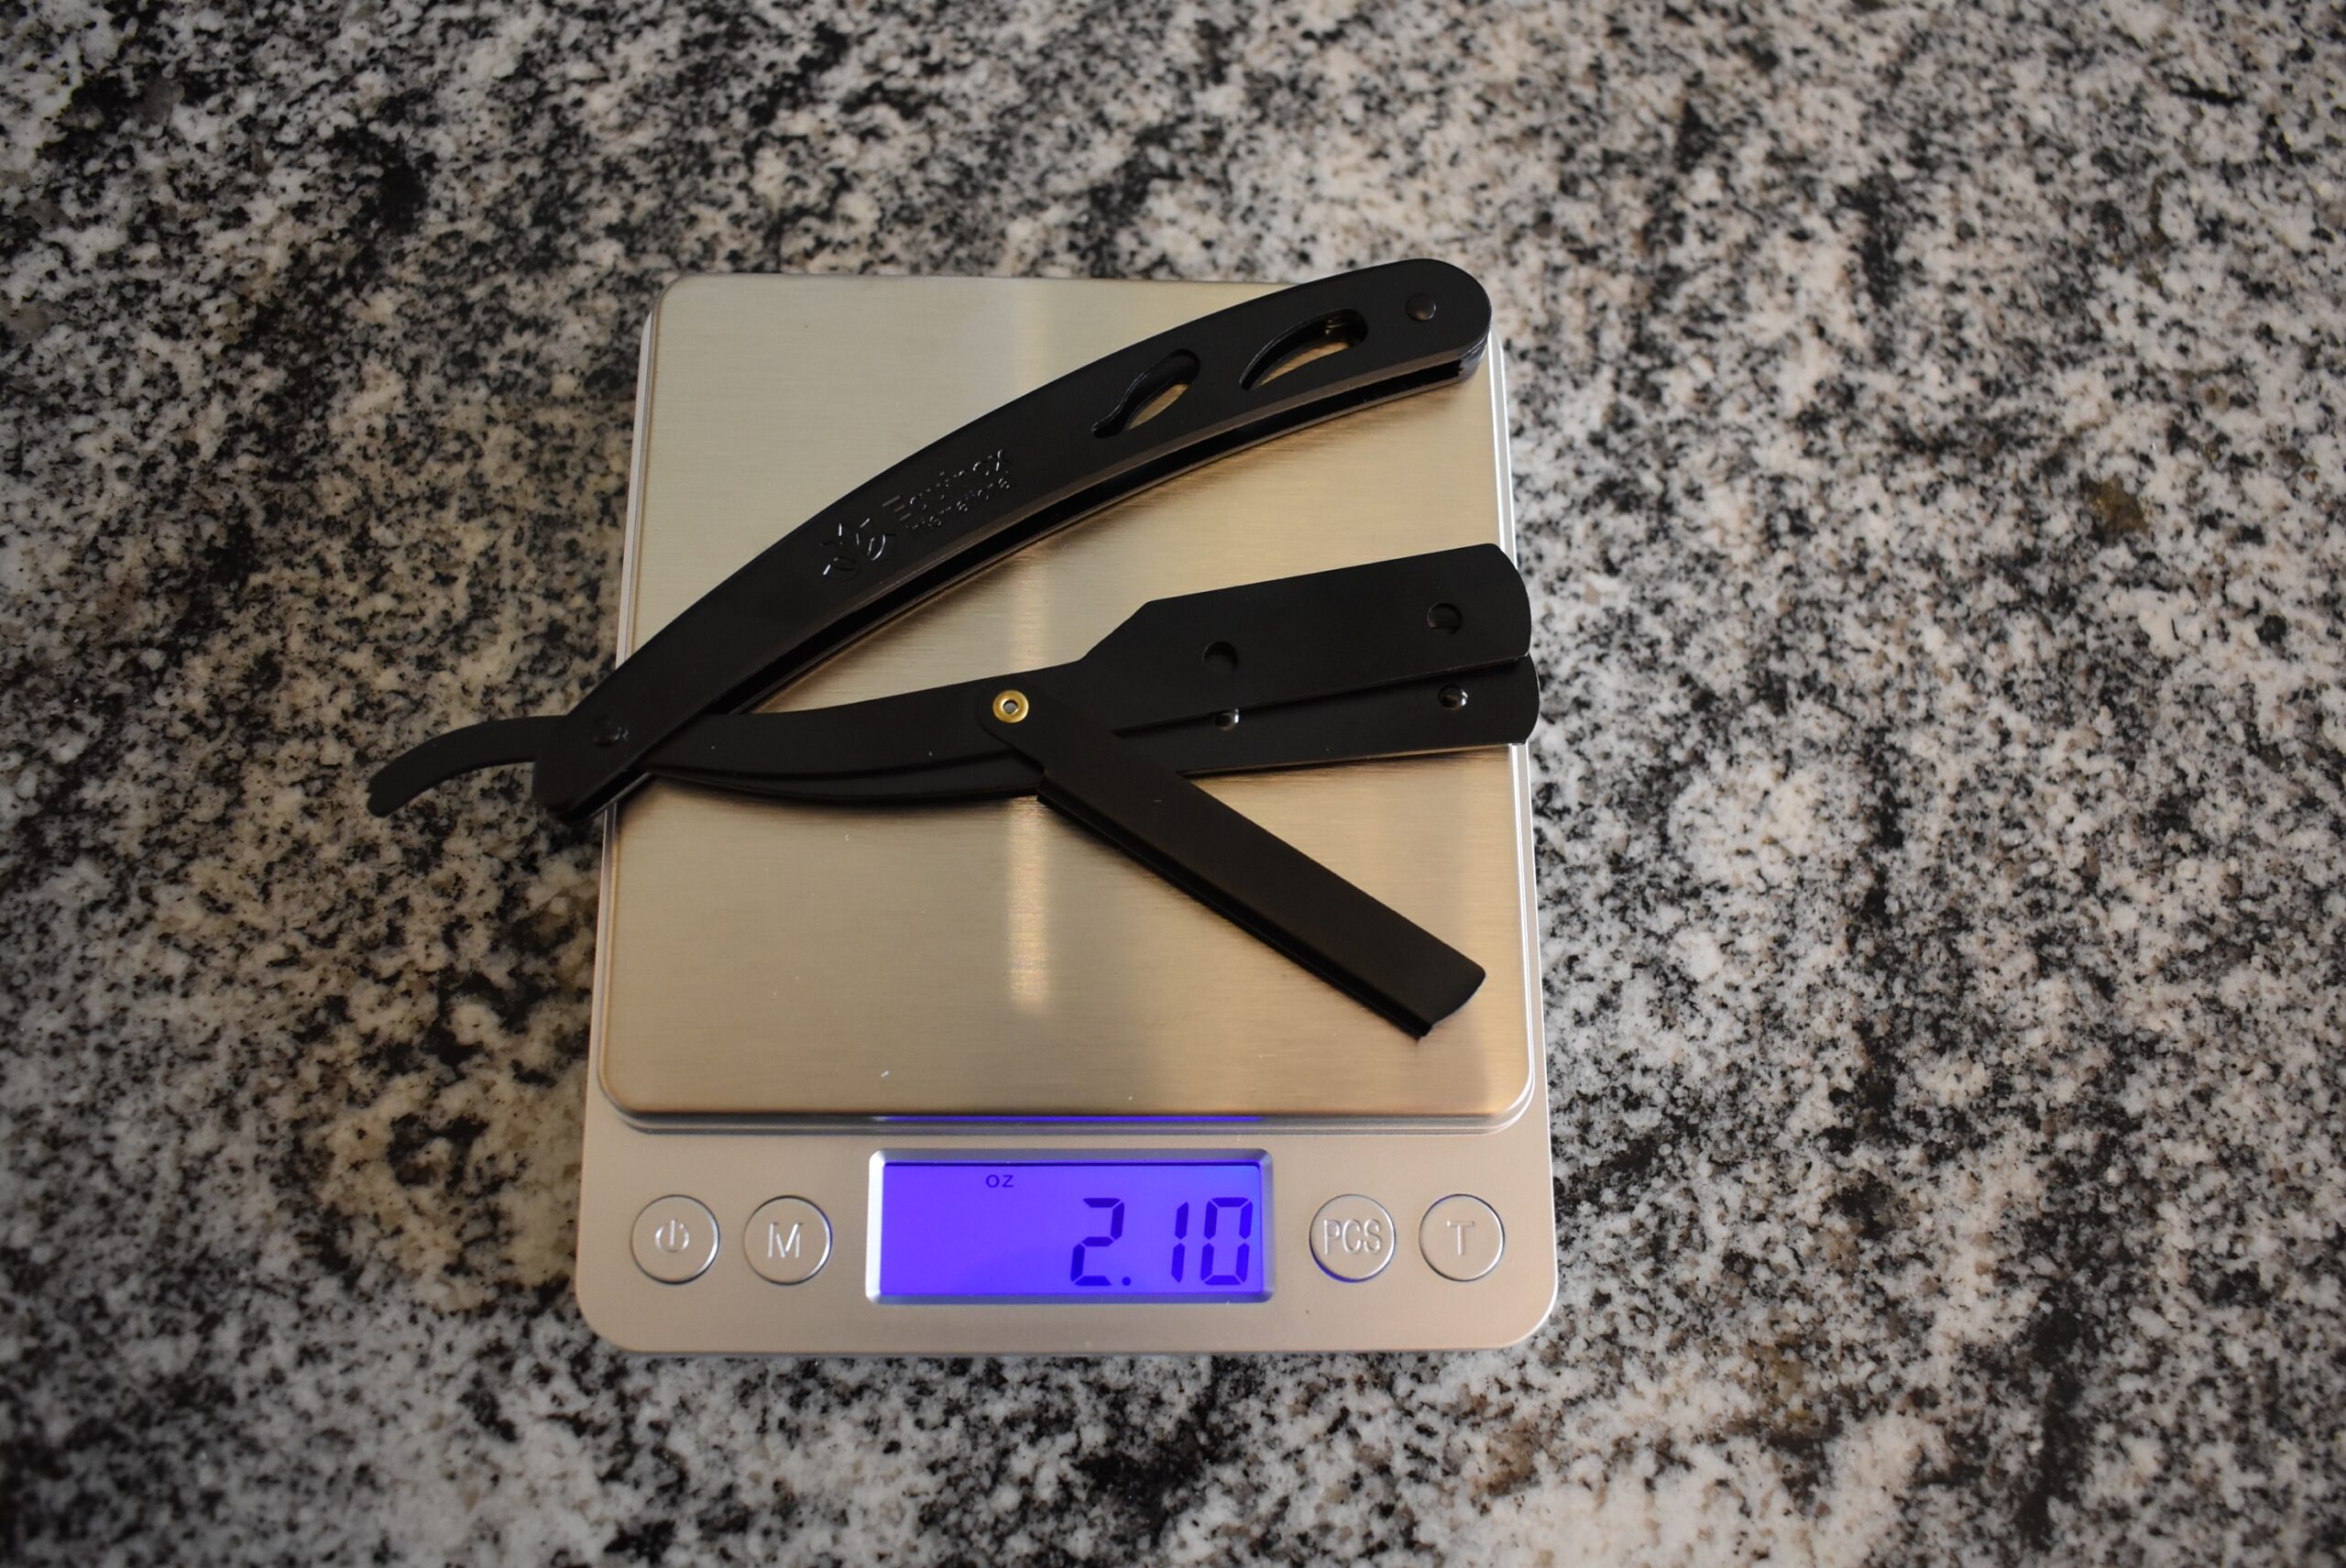 The Equinox professional straight razor showing 2.10 oz on a kitchen scale on a counter